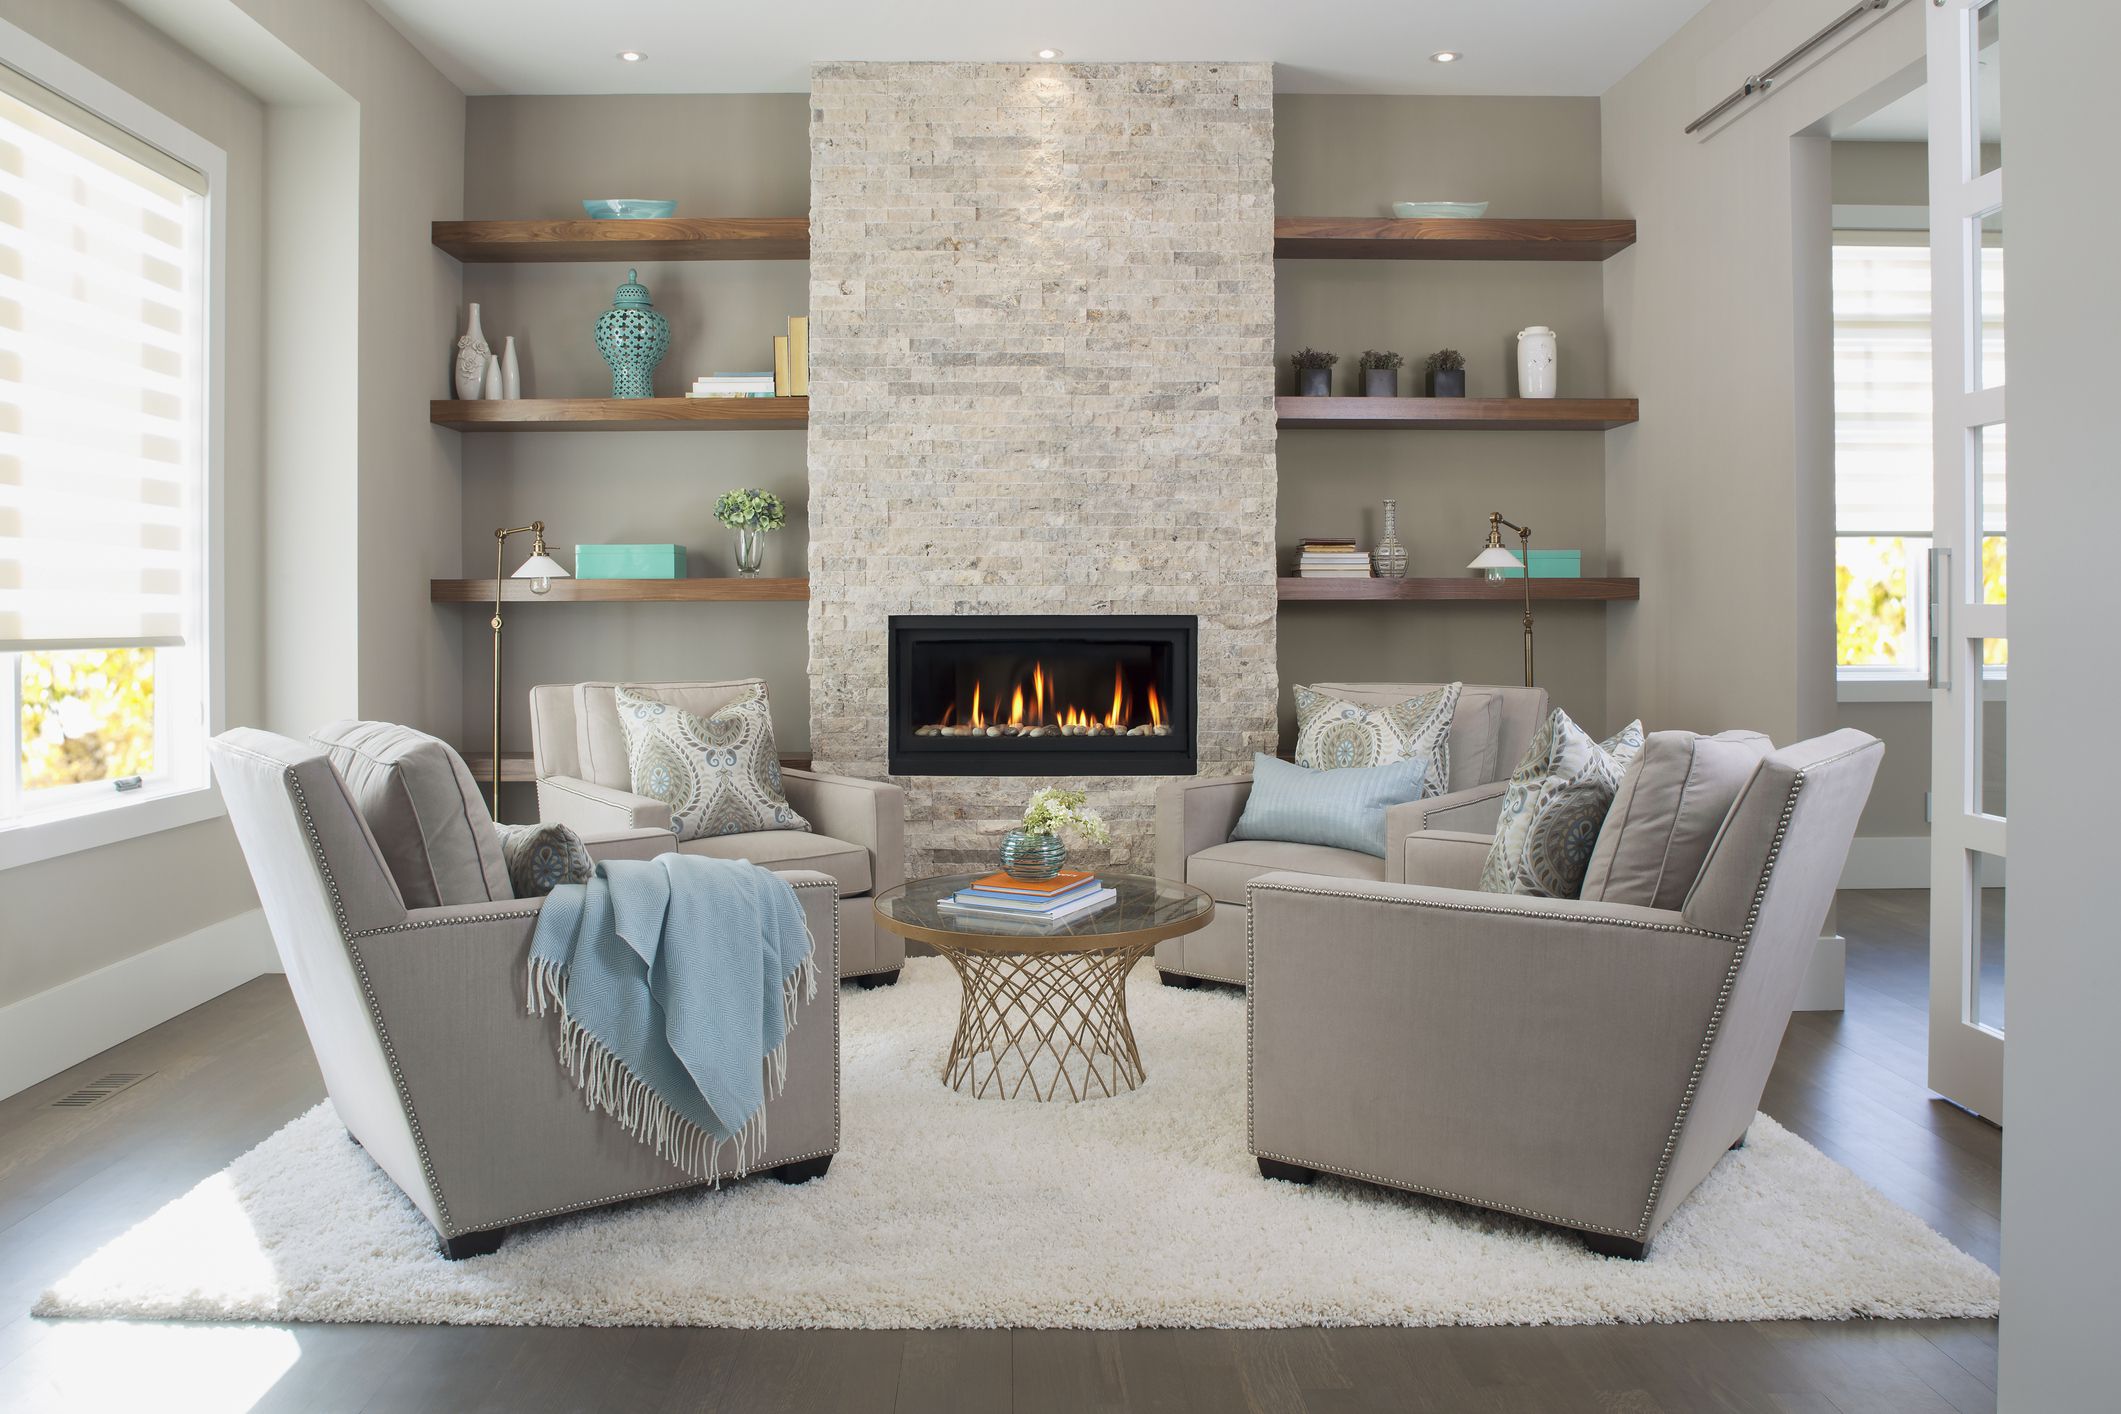 Four Season Rooms with Fireplaces Unique How to Find A Focal Point In A Room